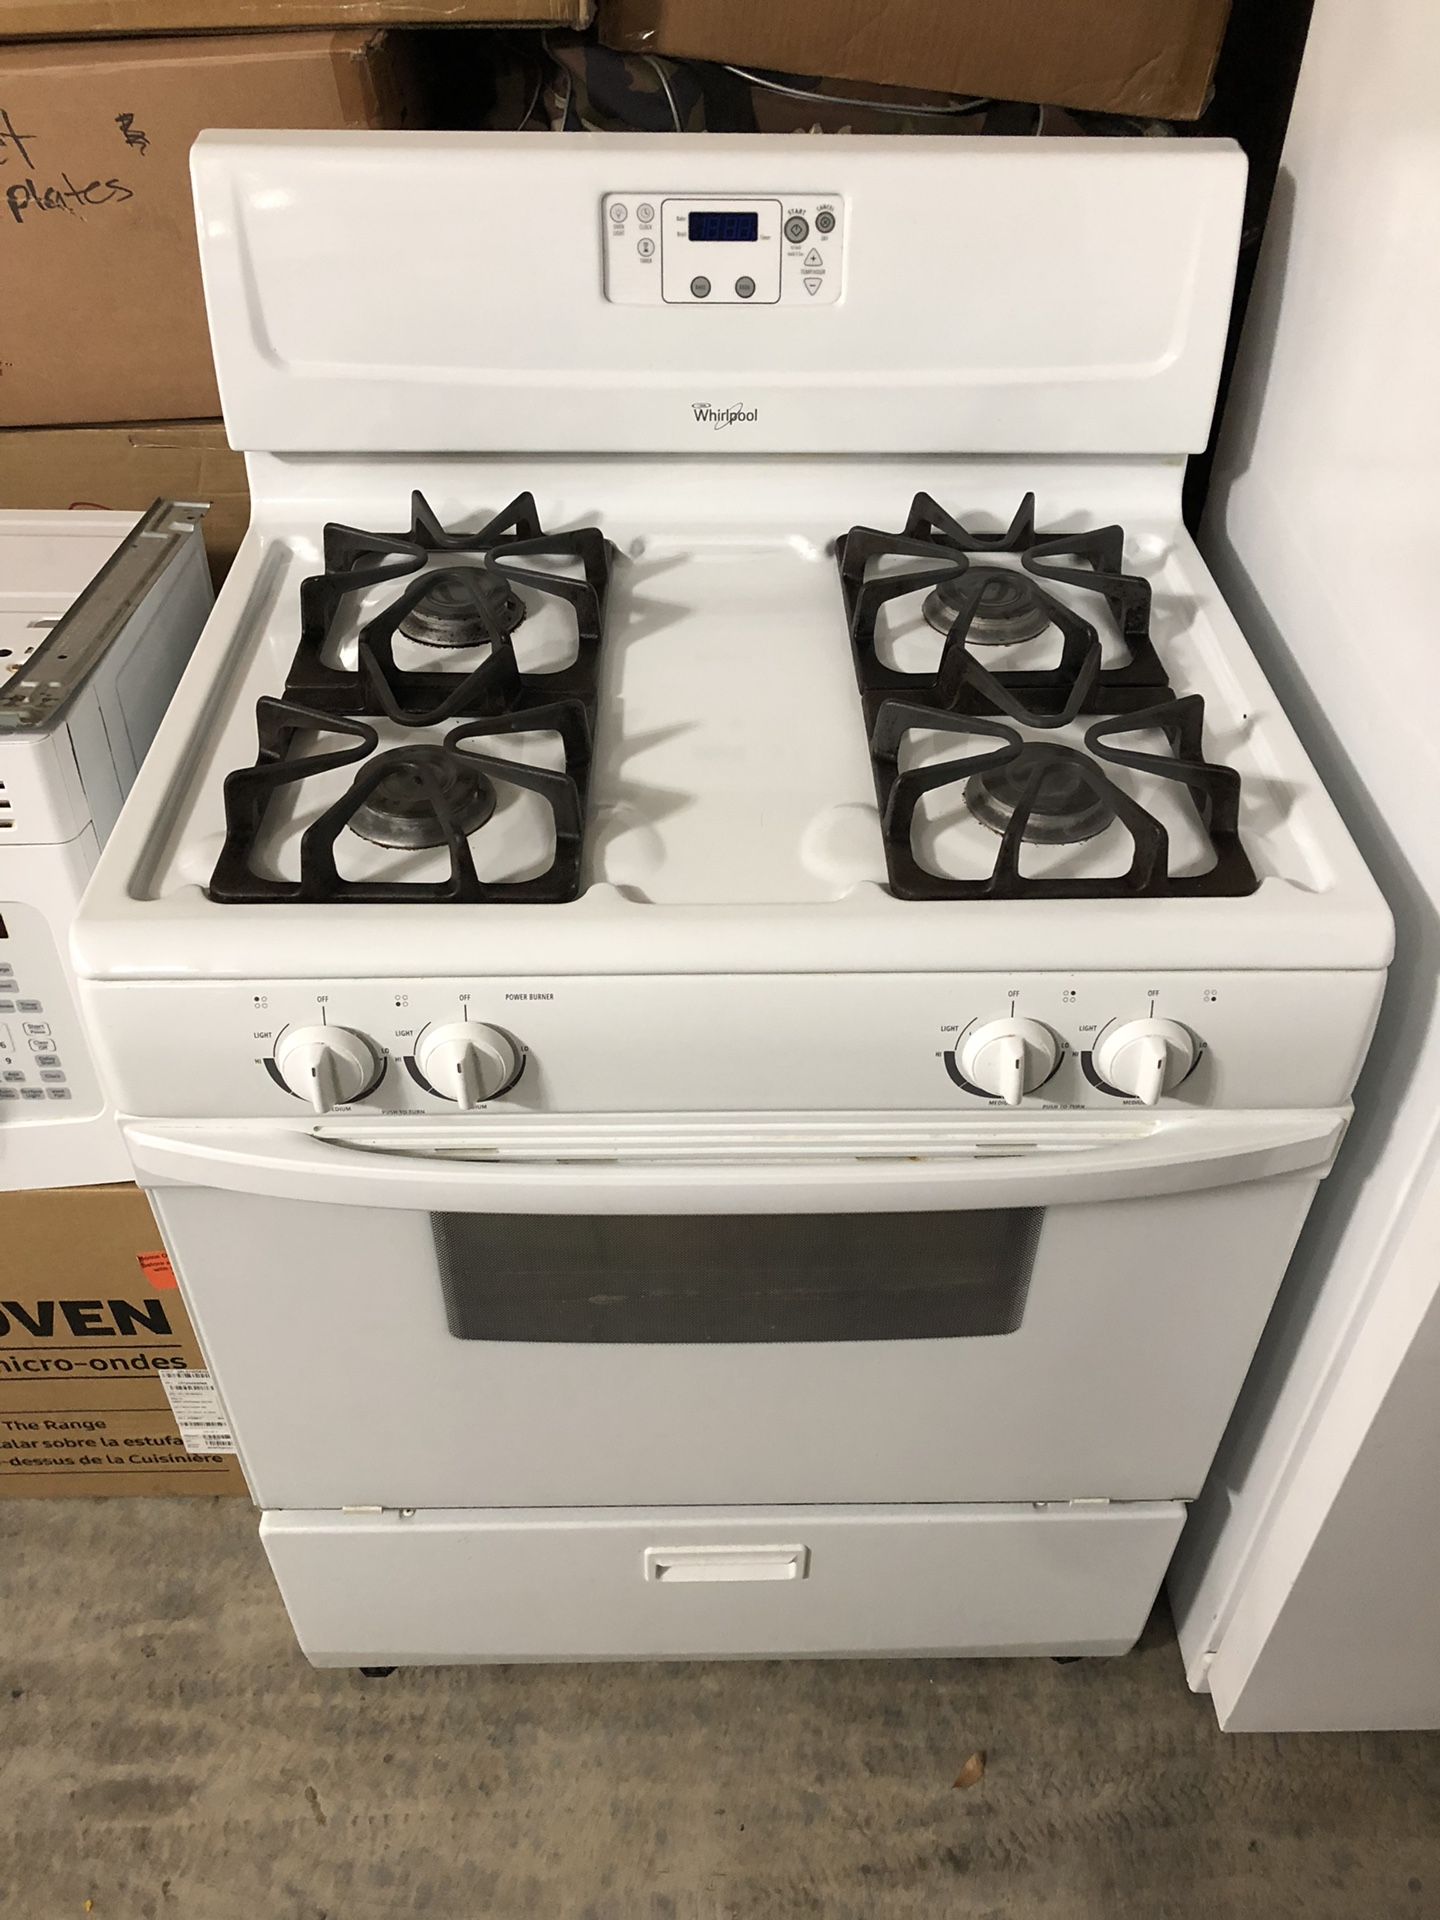 Whirlpool 4 burner gas stove in great working condition